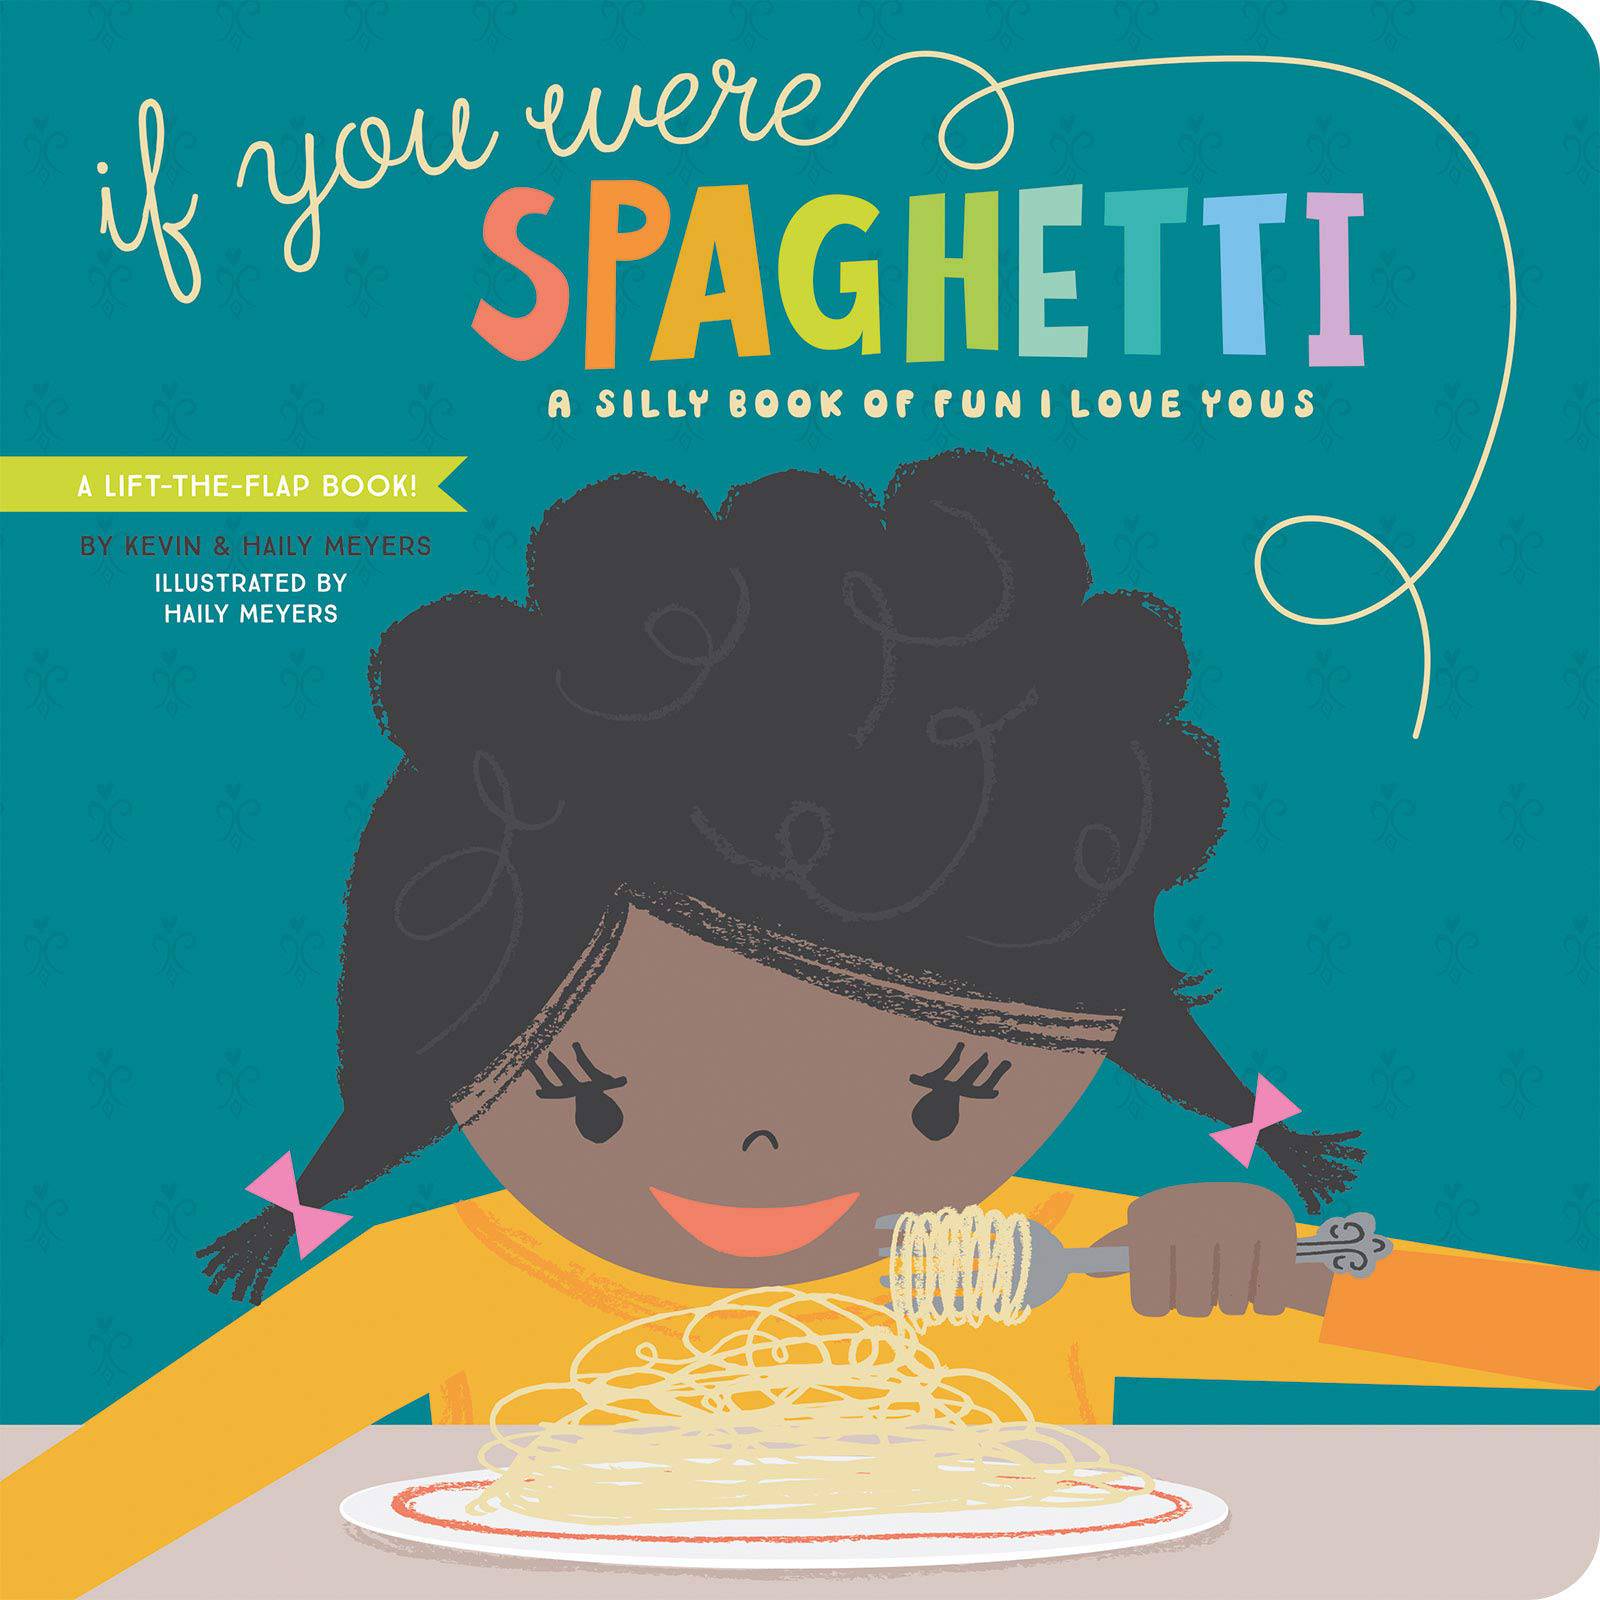 If You Were Spaghetti: A Silly Book of Fun I Love Yous - Twinkle Twinkle Little One